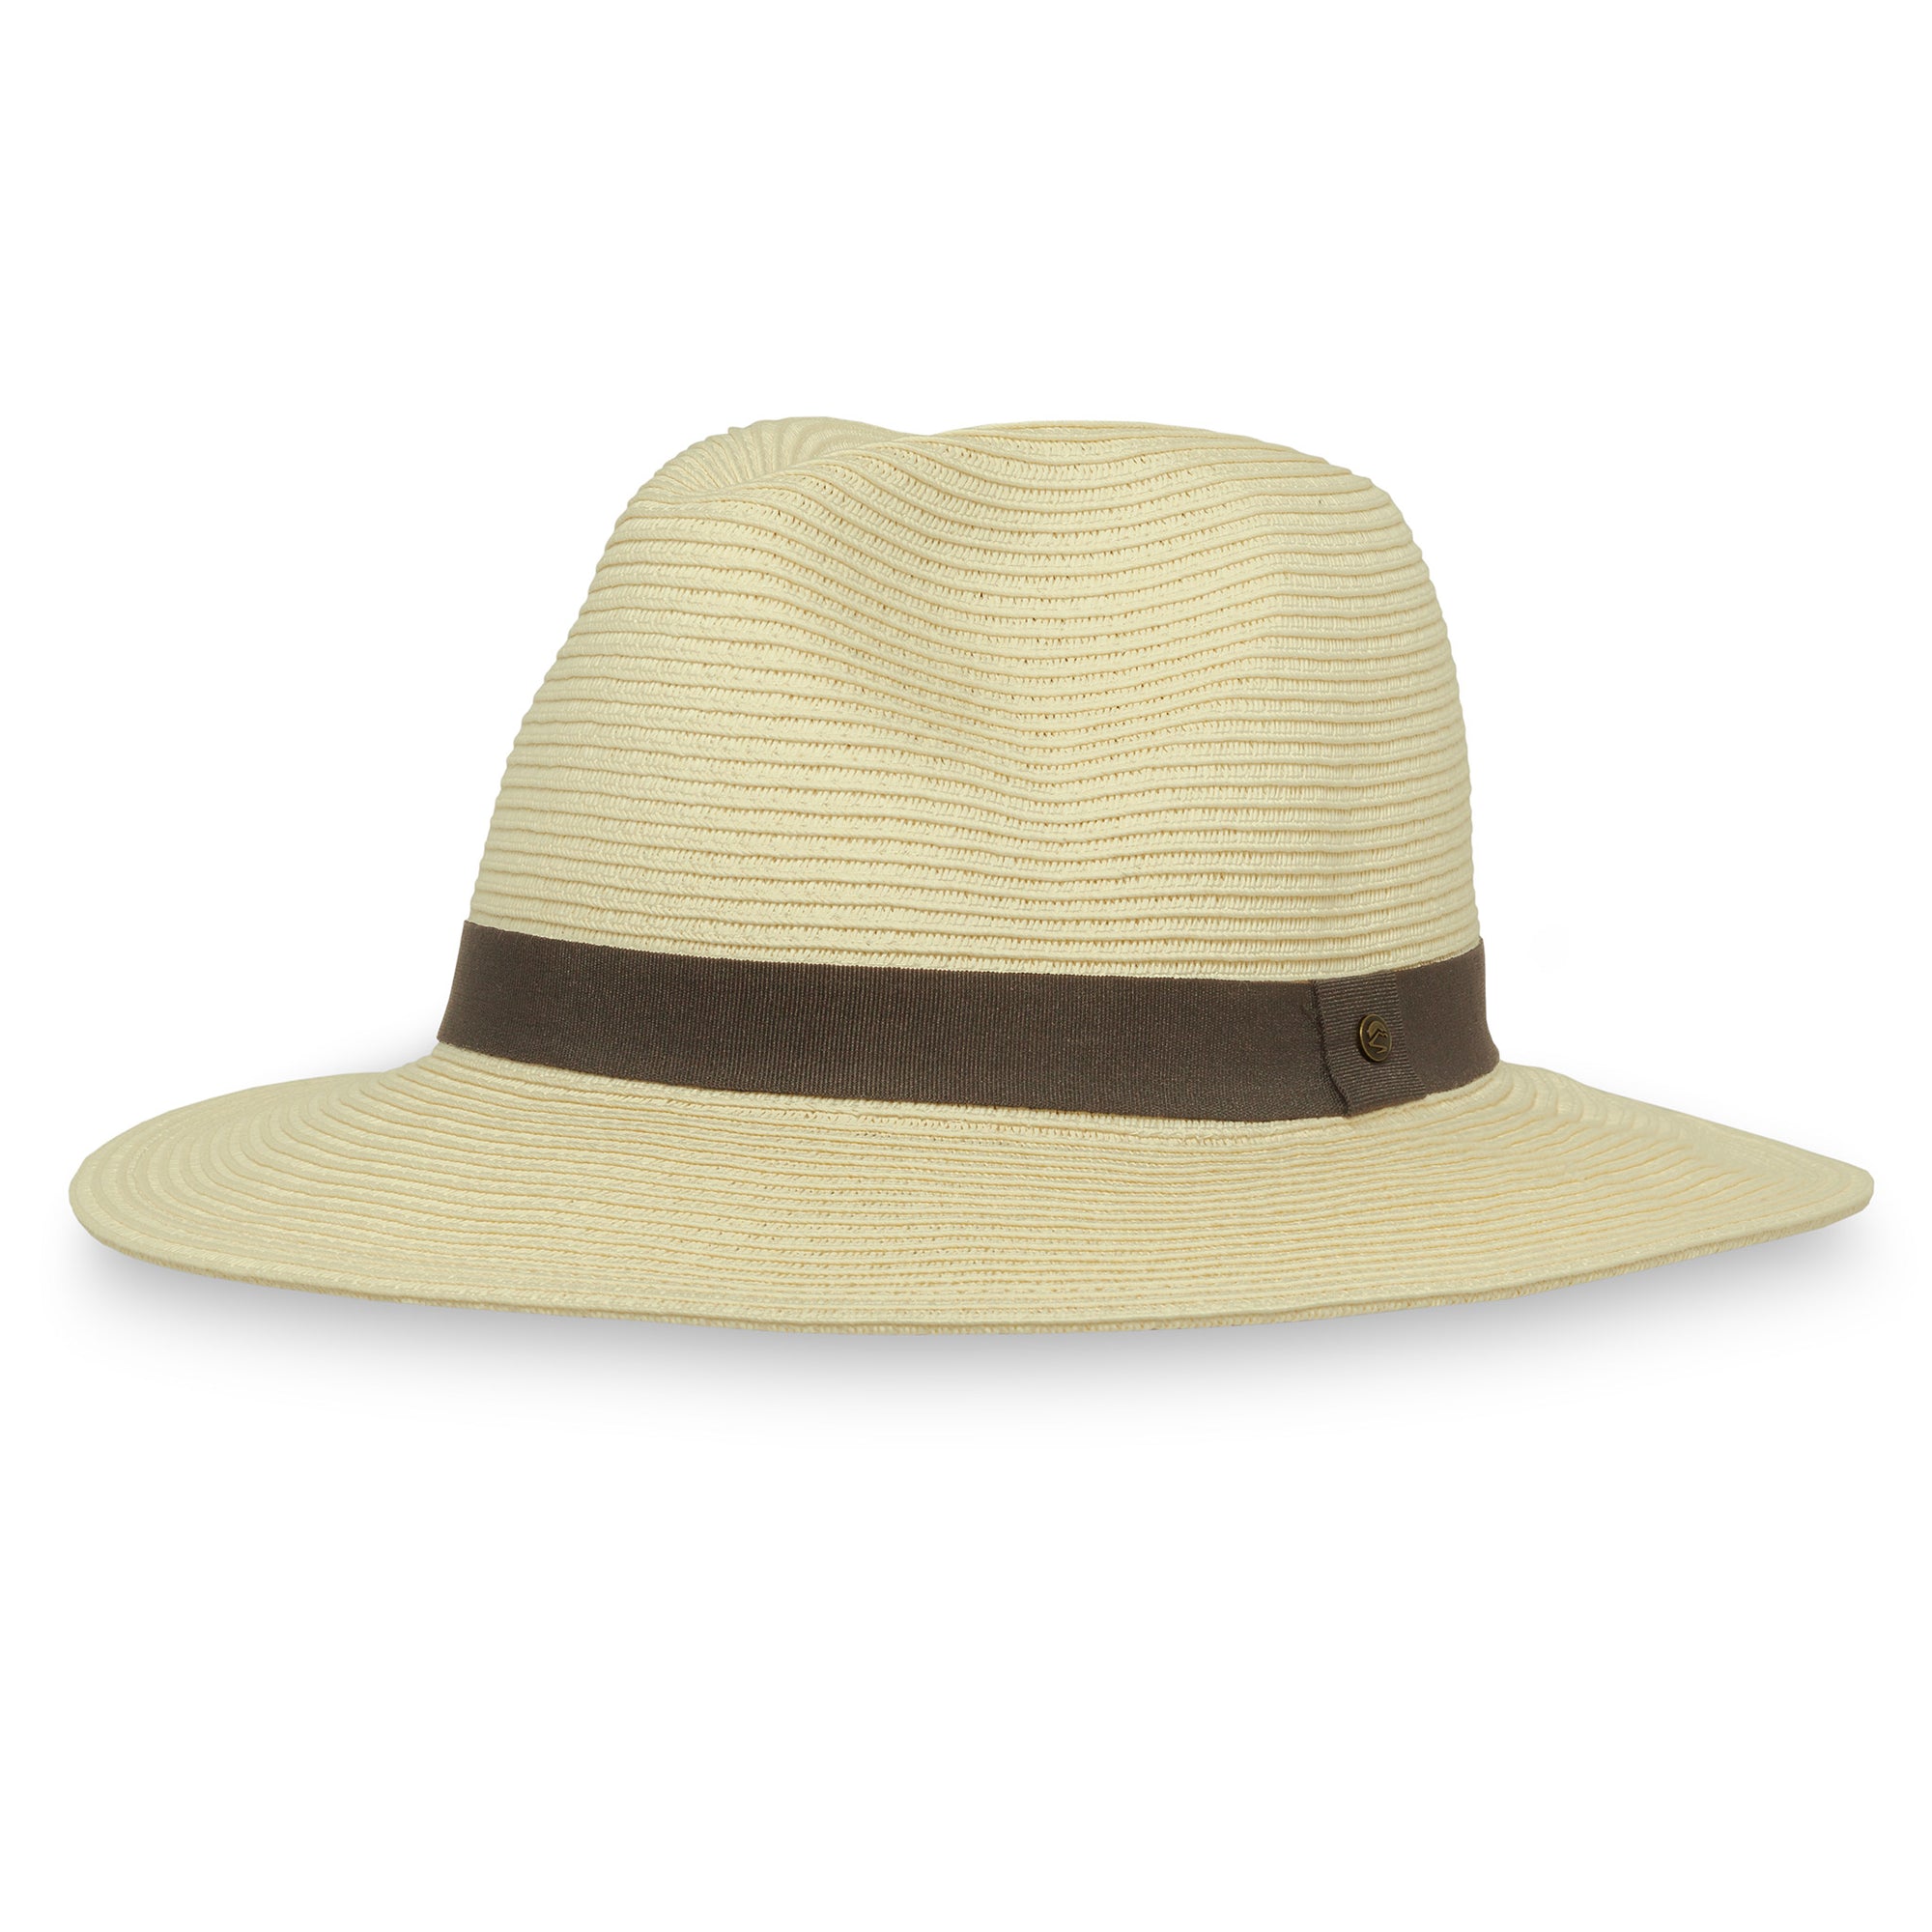 photo of sunday afternoons havana hat in creme